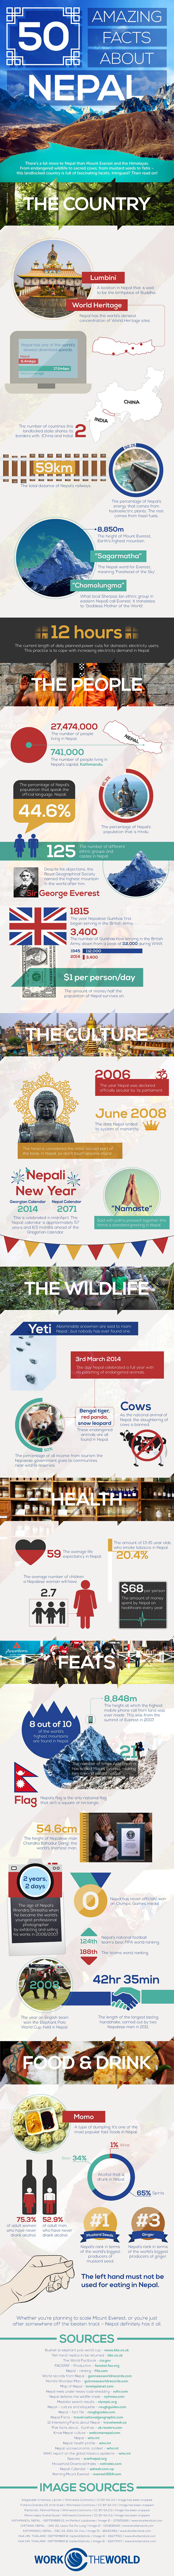 50 Interesting Facts About Nepal - Travel infographic